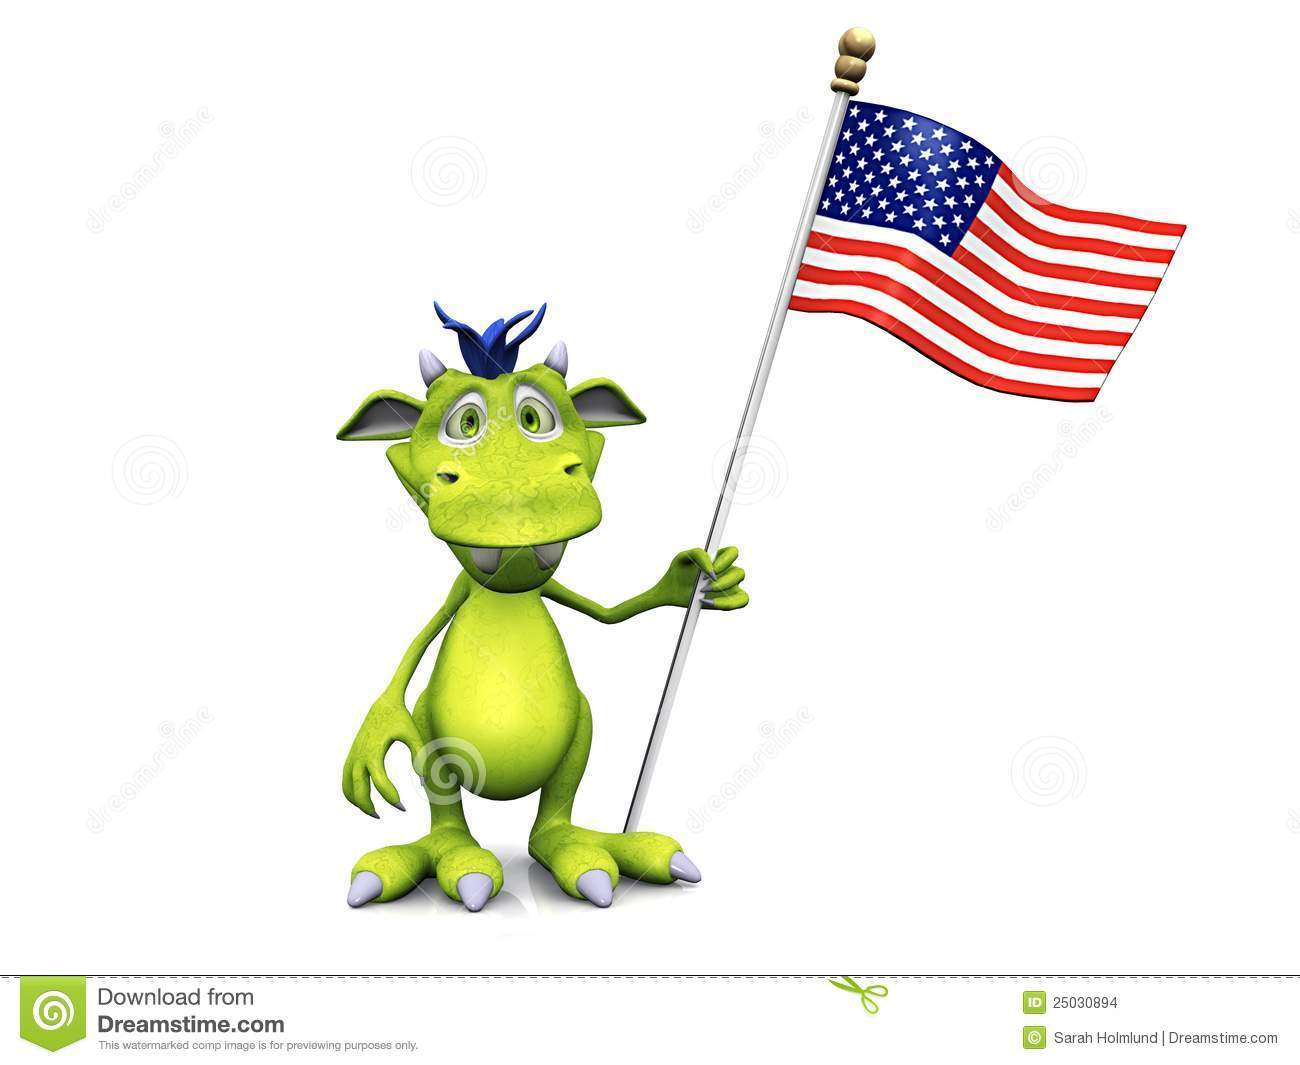 Cute Cartoon Monster Holding An American Flag  Stock Images   Image    